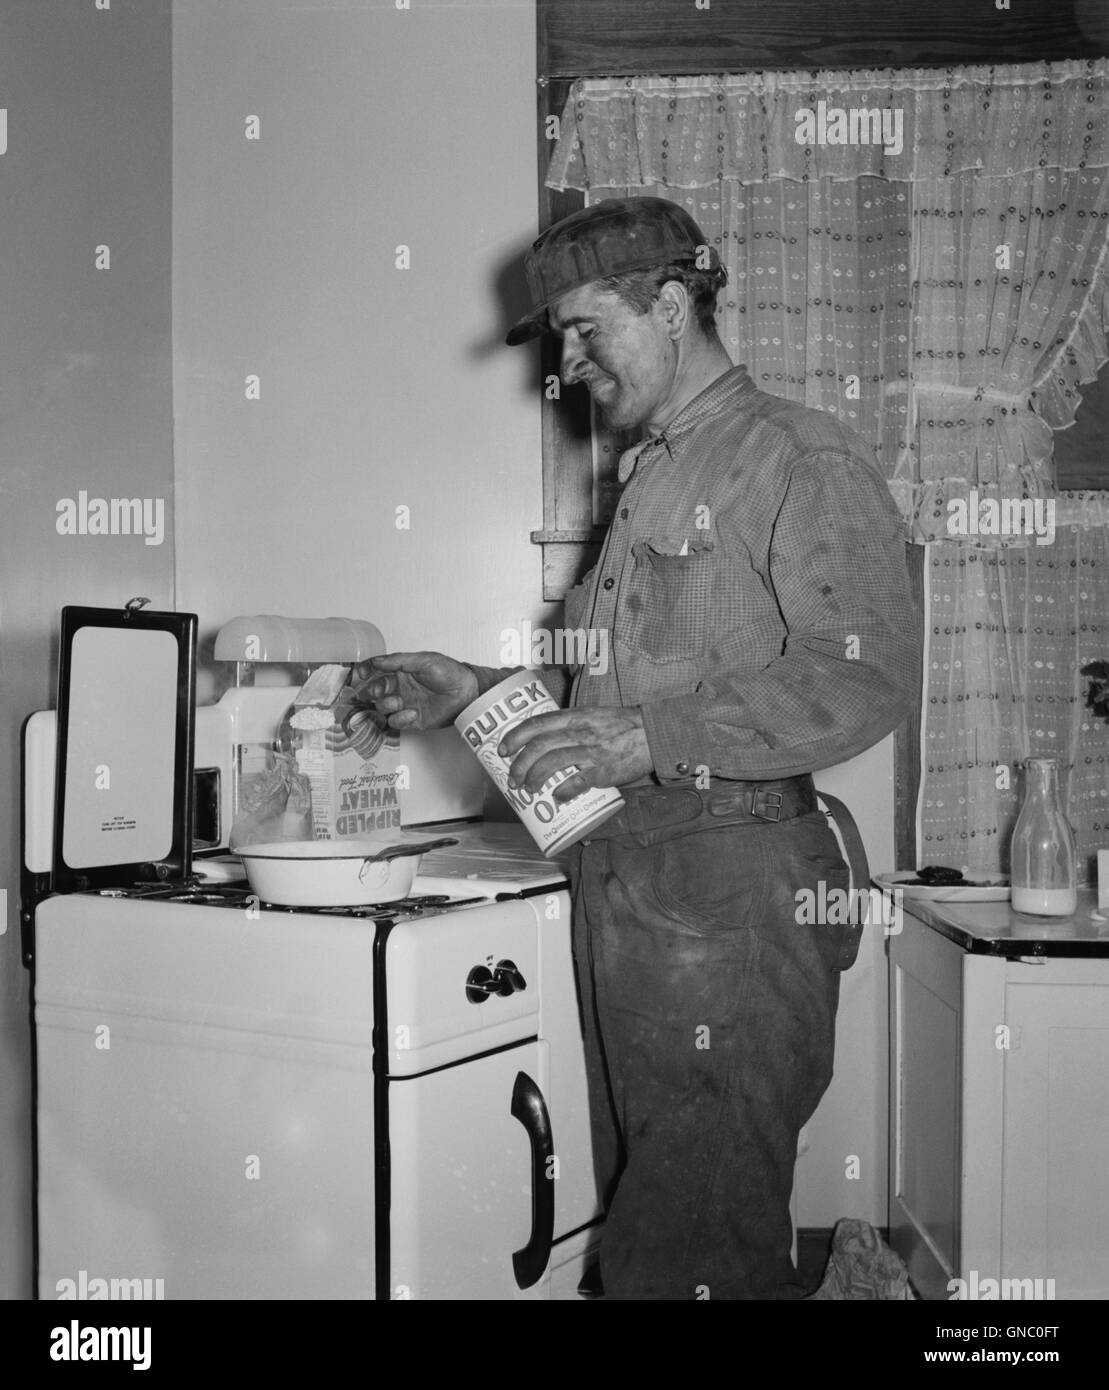 Coal Miner Making Breakfast at Home after Returning from Night Shift Work, Westover, West Virginia, USA, Marion Post Wolcott for Farm Security Administration, September 1938 Stock Photo